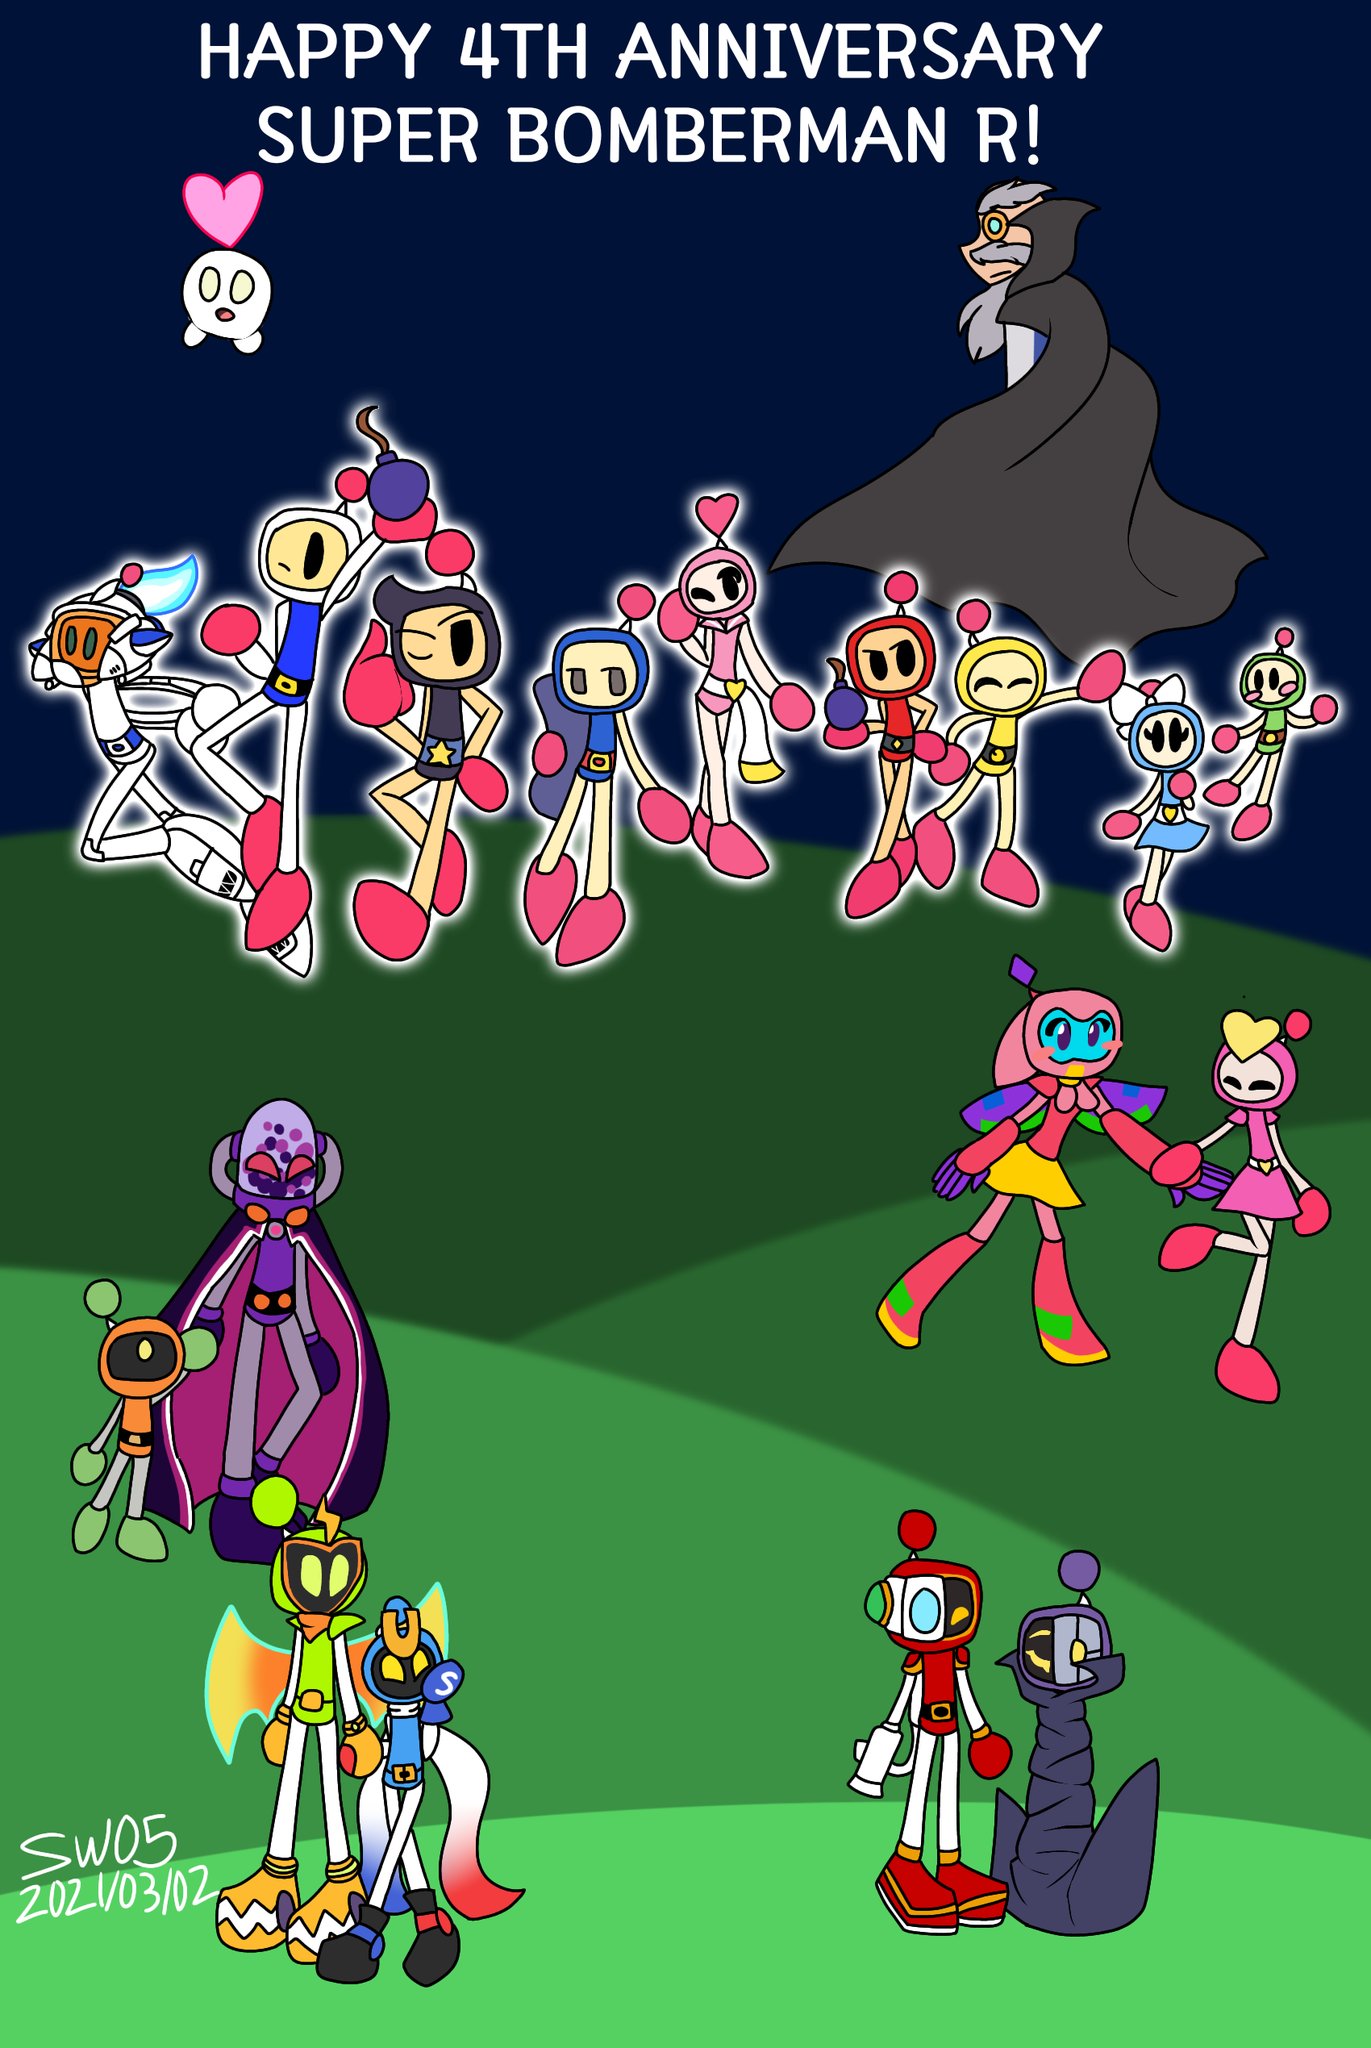 Lily S. on X: Super Bomberman 4 finished fanart! This game and 5